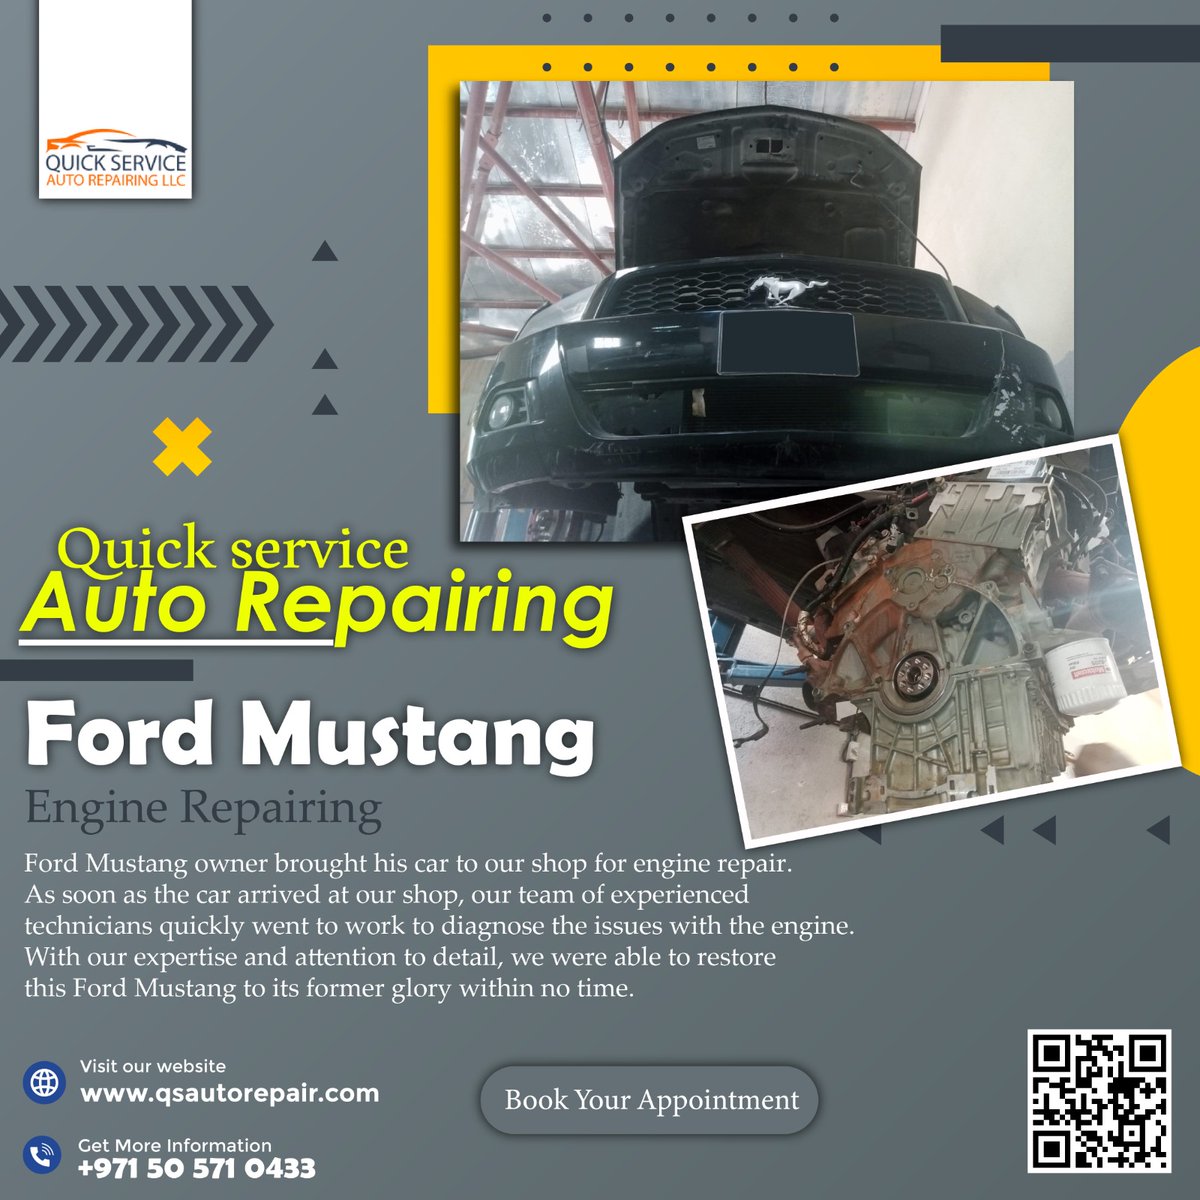 Ford Mustang owner brought his car to our shop for engine repair.  With our expertise and attention to detail, we were able to restore this Ford Mustang to its former glory within no time.
qsautorepair.com

#electrical #minorservice #engineoil #autorepairs #carrepair